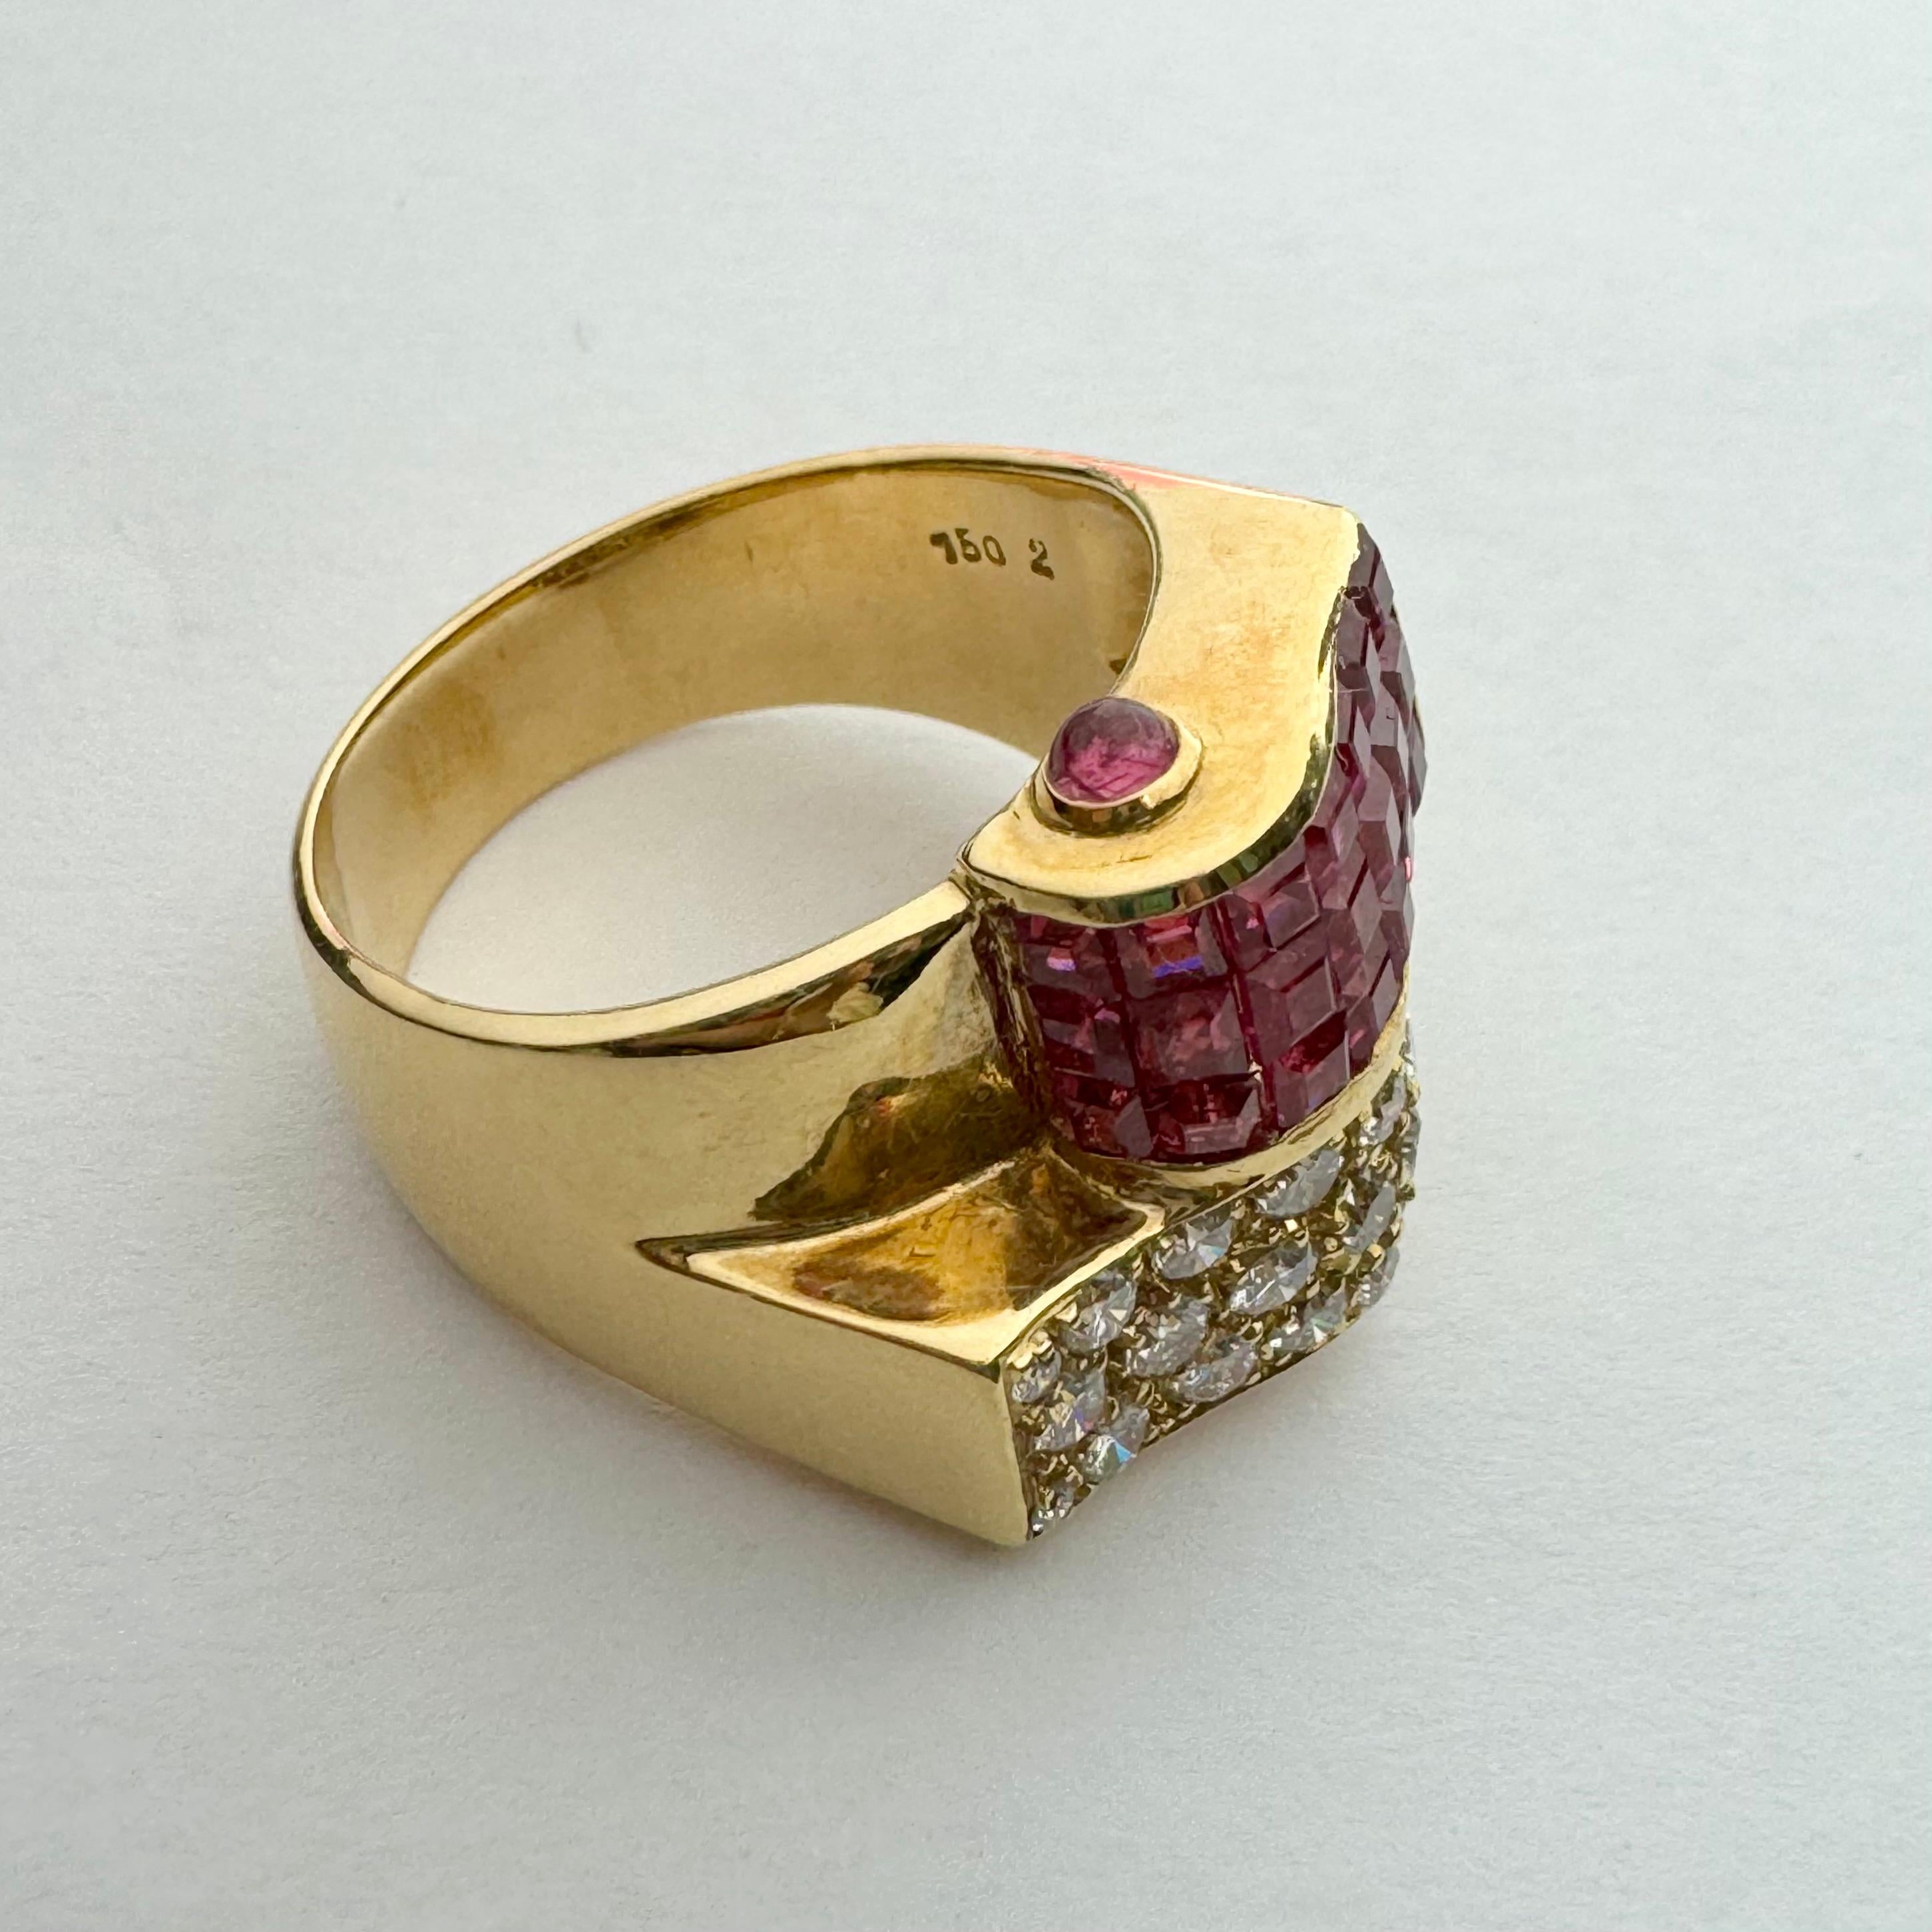 Unique modern ruby and natural brilliant cut white diamond mirrored scroll ring, in 18K yellow gold. This ring features a unique scroll design unraveling in opposite directions; one side with stunning white pave set round brilliant diamonds, and the